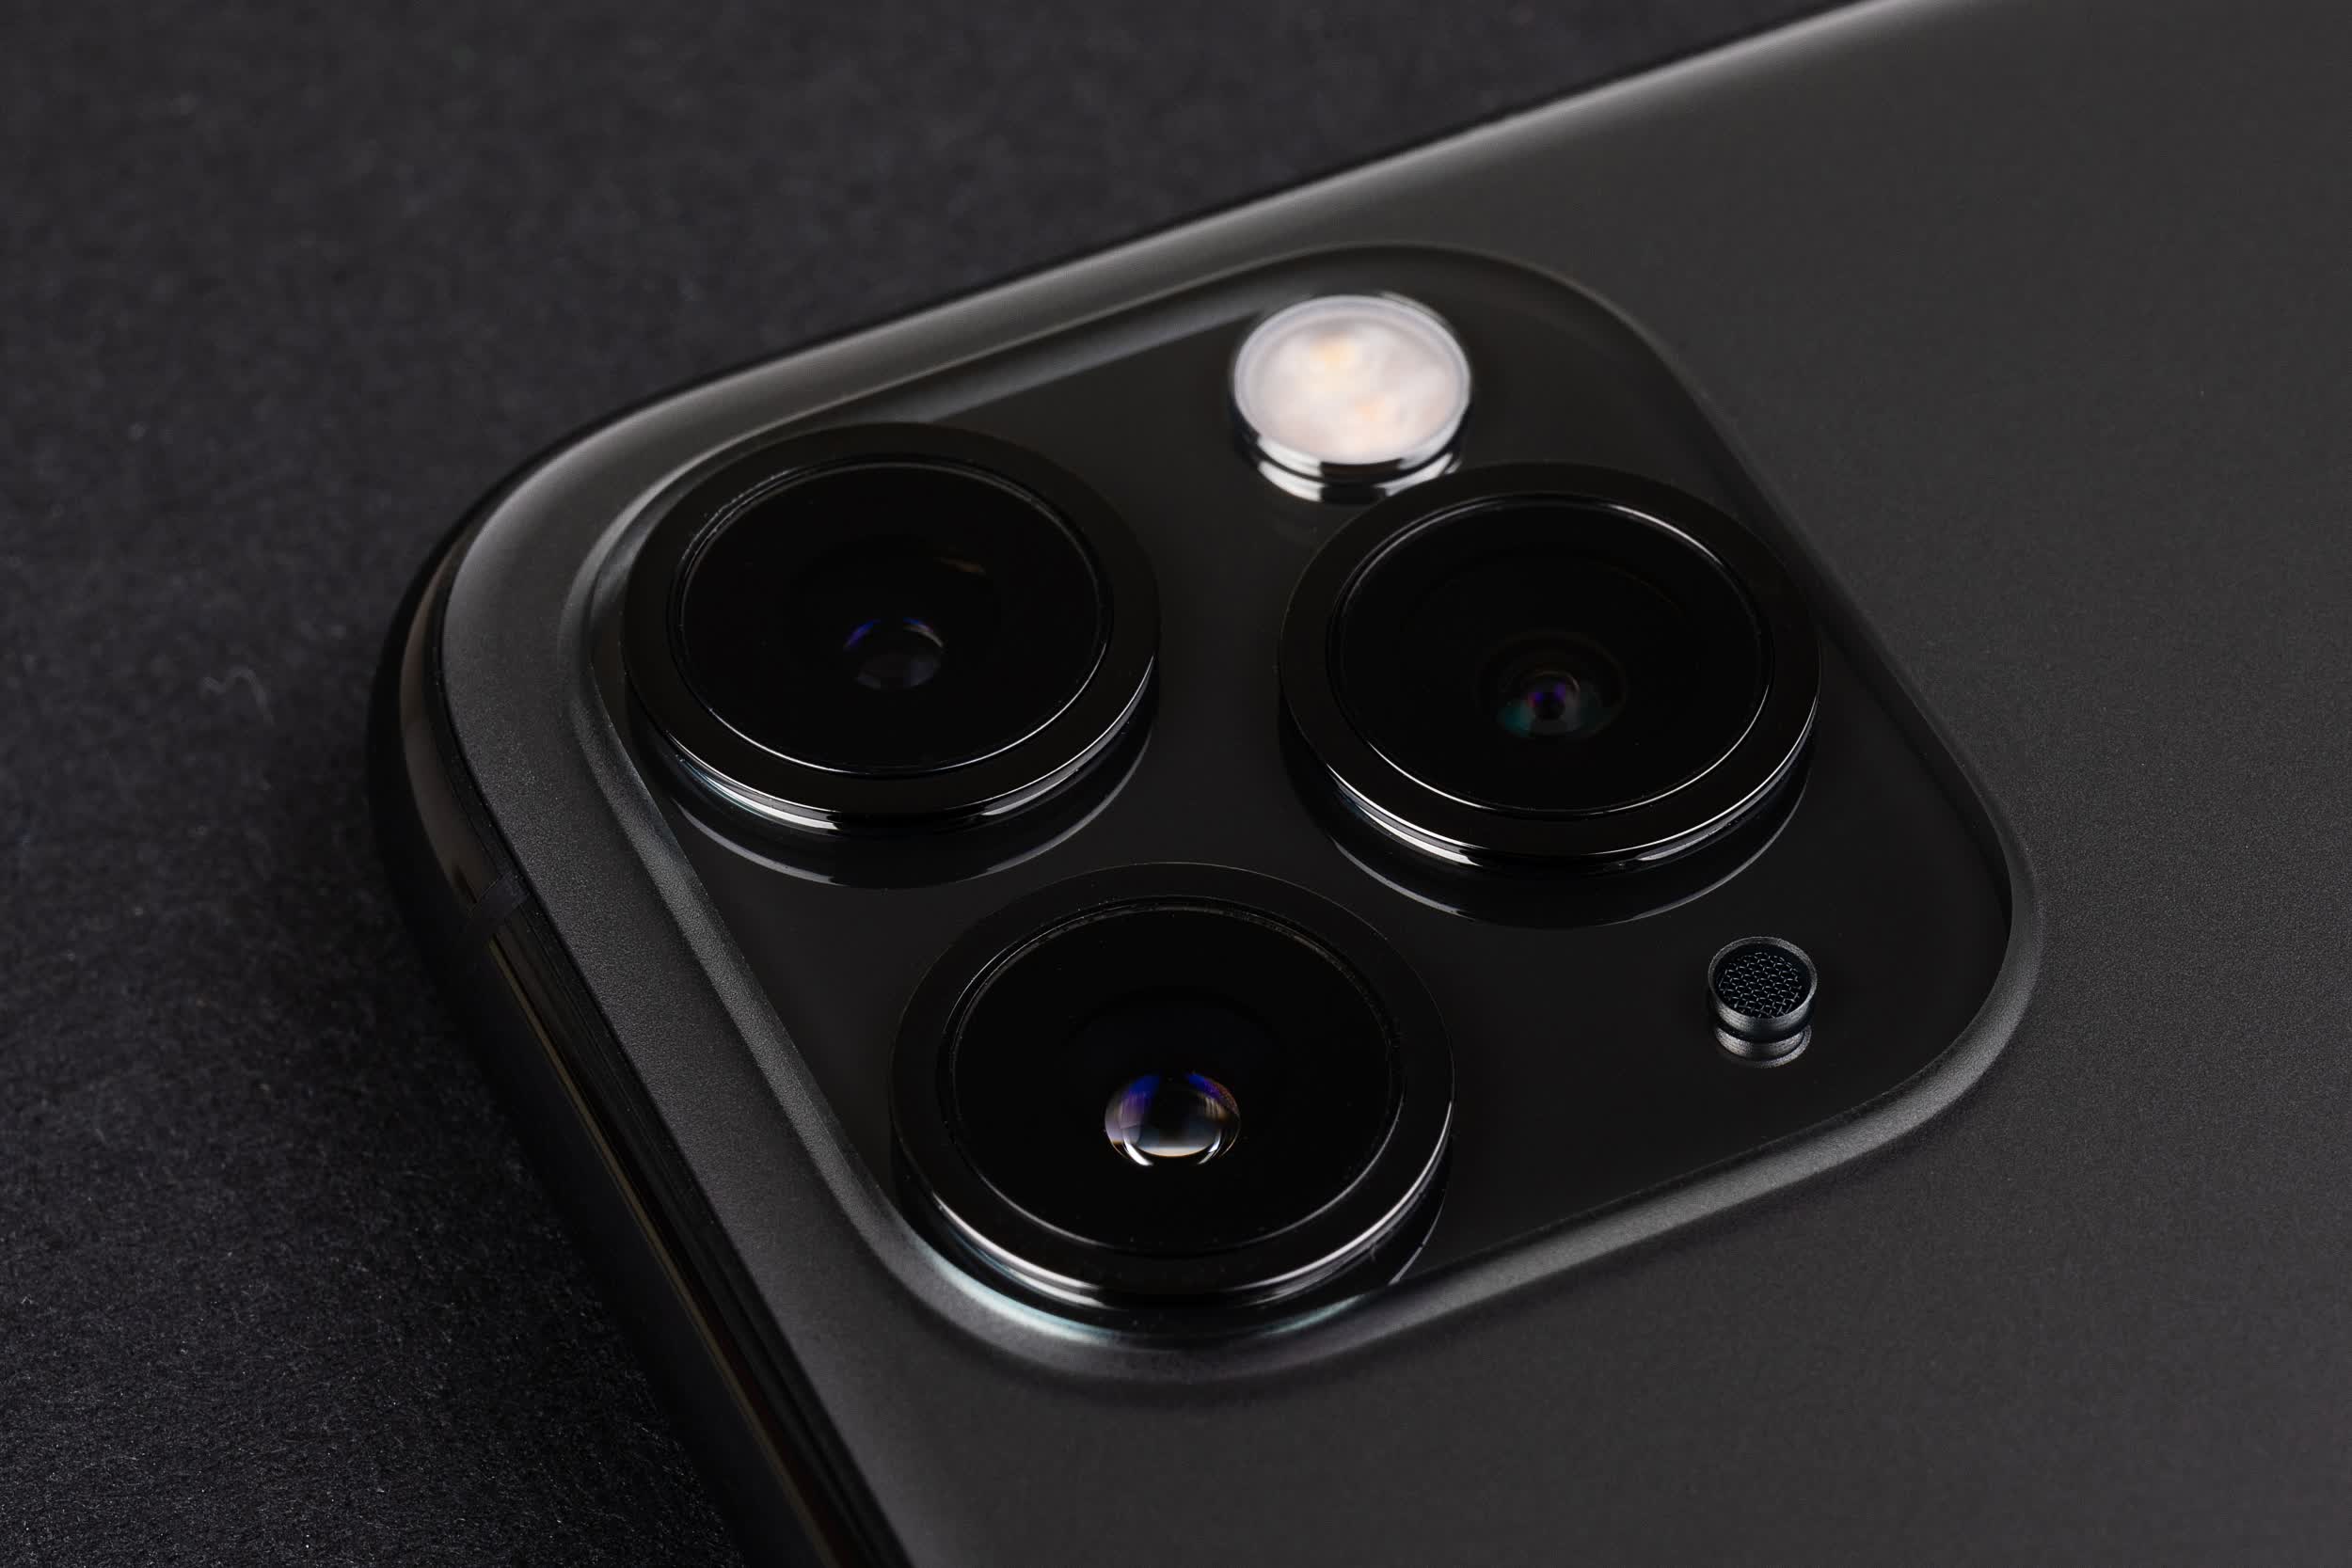 Private: iPhone 14 Pro rumored to feature 48MP camera, periscope lens coming in 2023